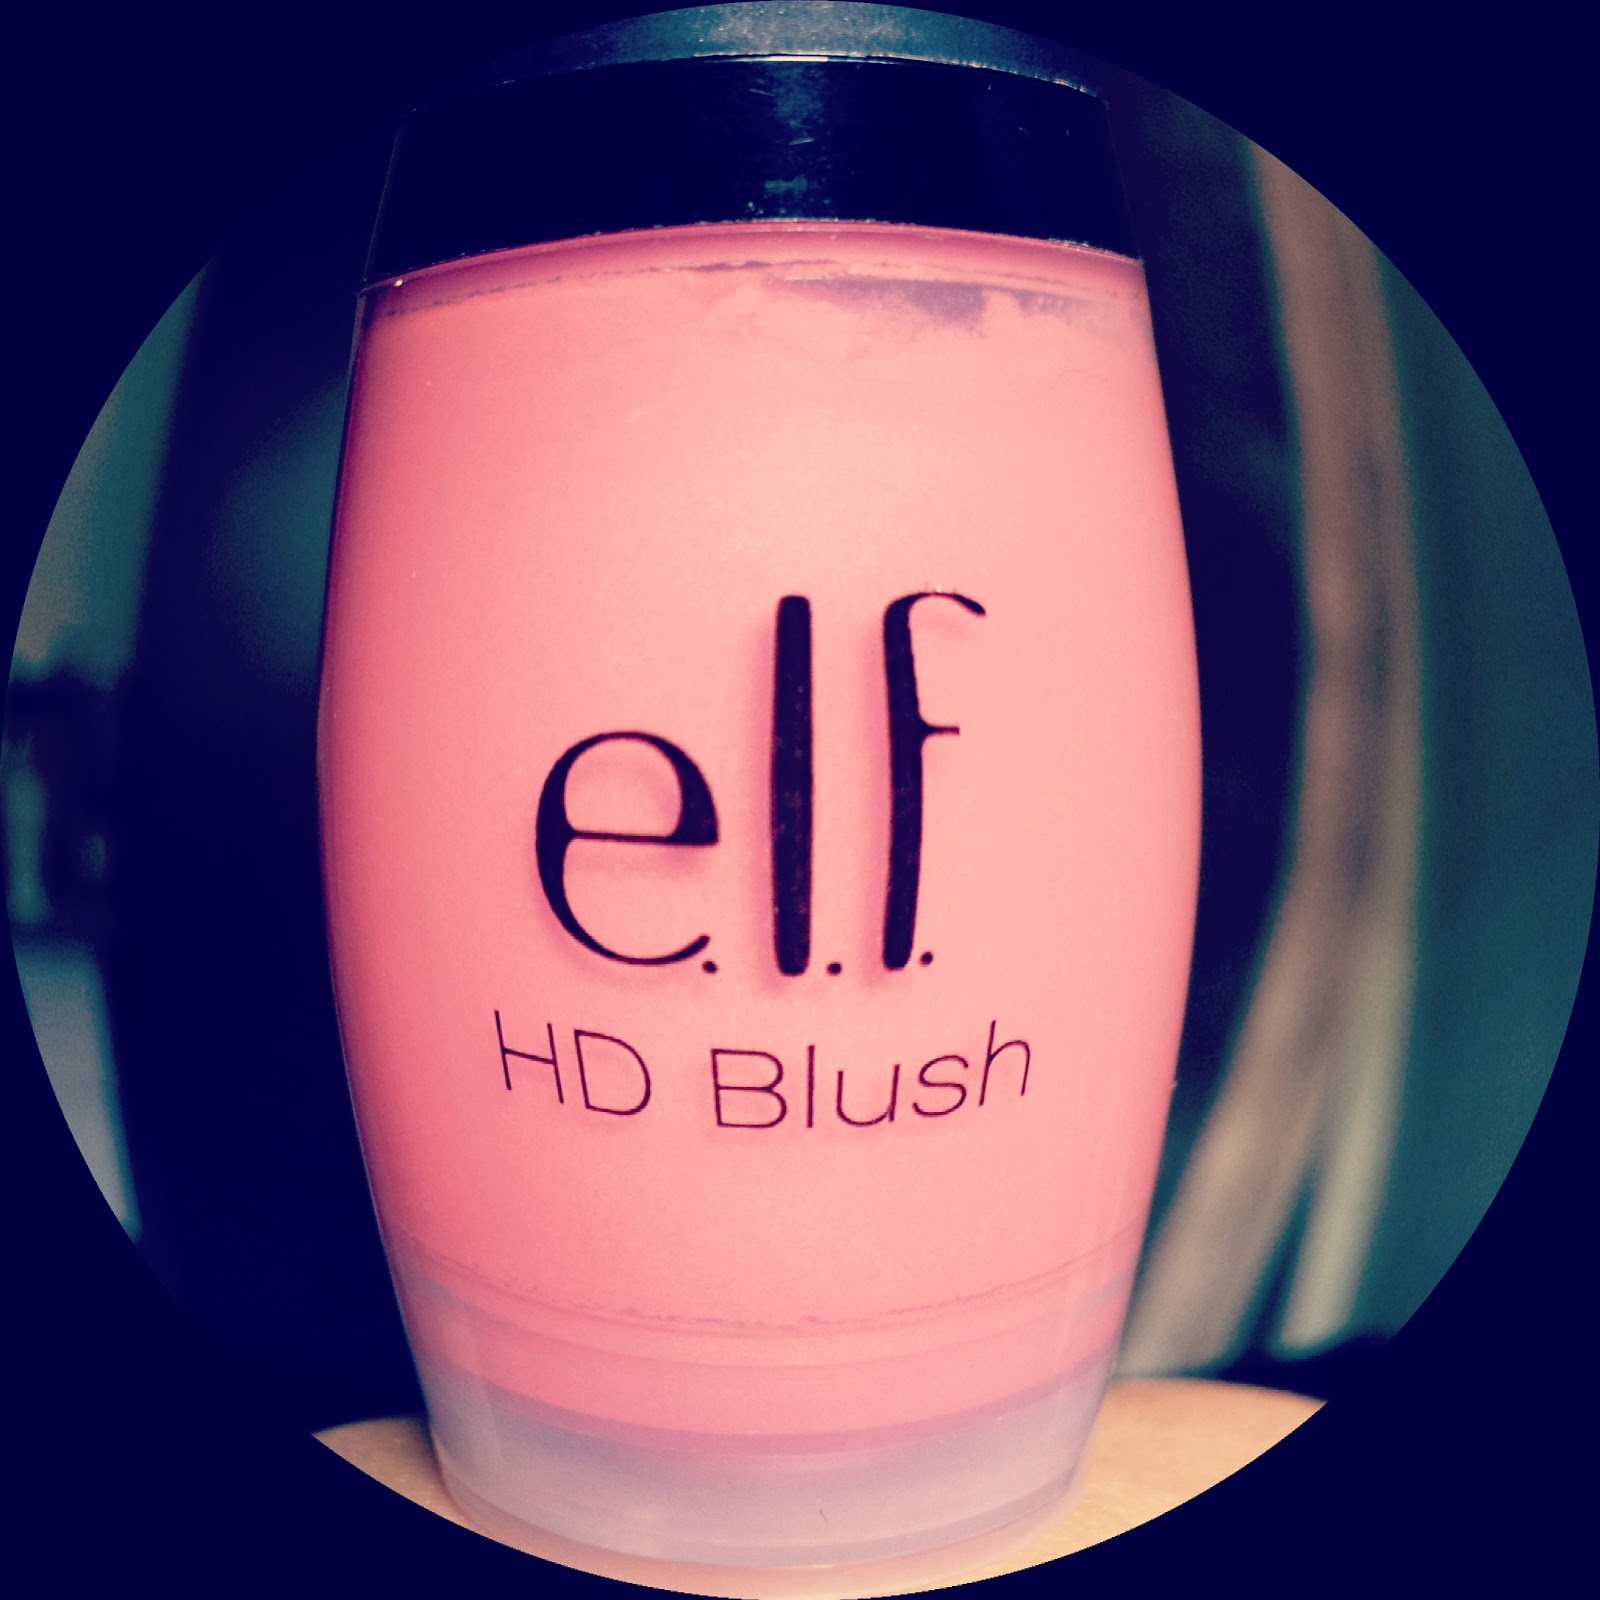 ELF HD Blush in Superstar Product Review